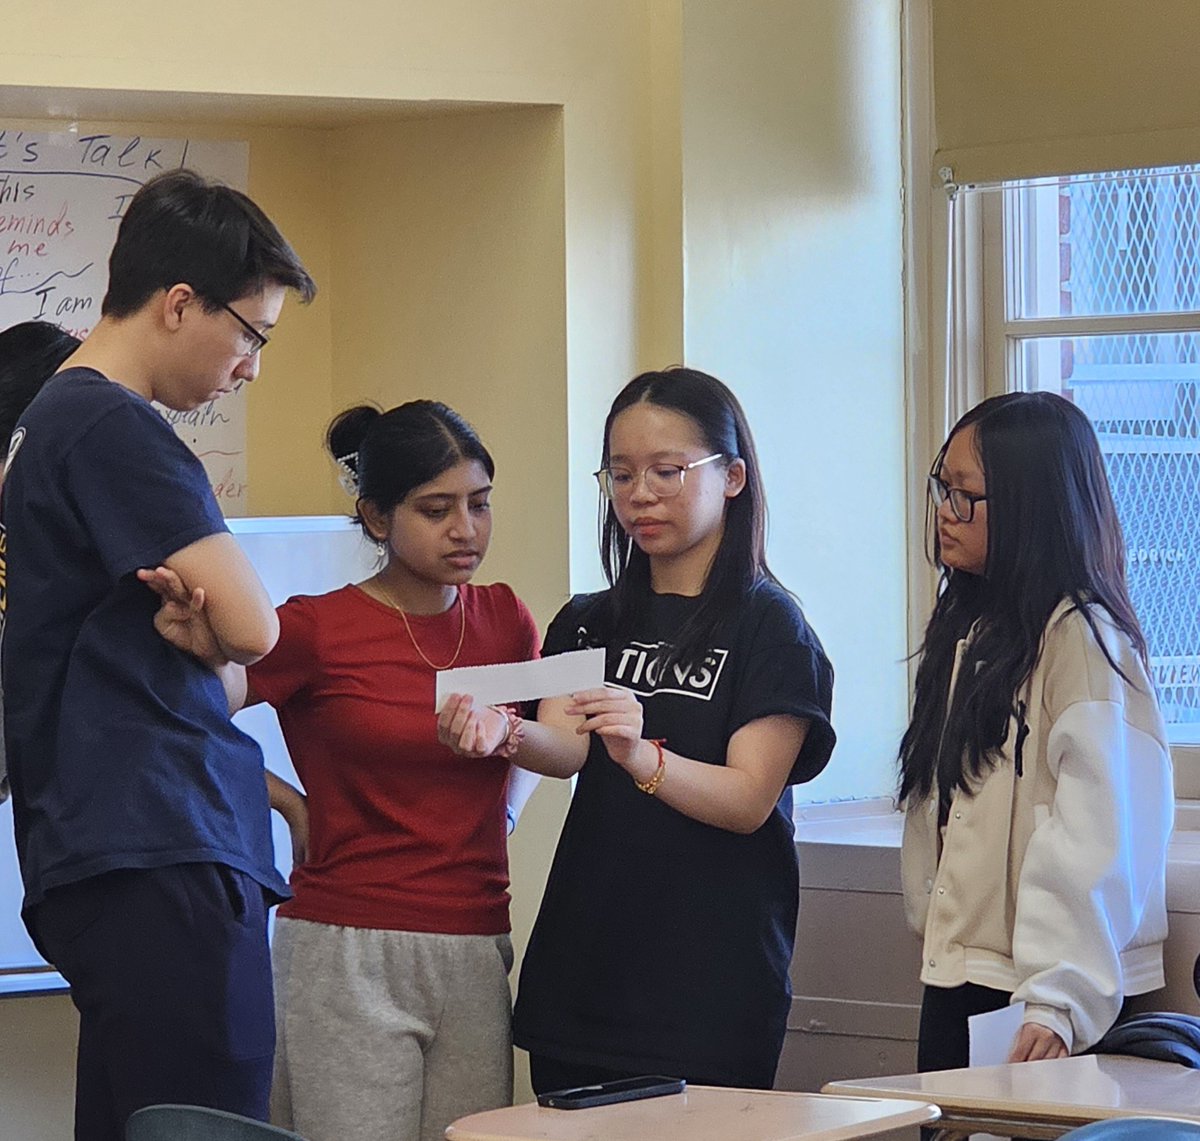 Partnering with the @expand_school, our #Hk STEAM EDU program at Midwood HS has had a fantastic beginning! Our aspiring #STEAMeducators are broadening their understanding of the social and emotional development of children through diverse roleplay scenarios. #HandsOnLearning